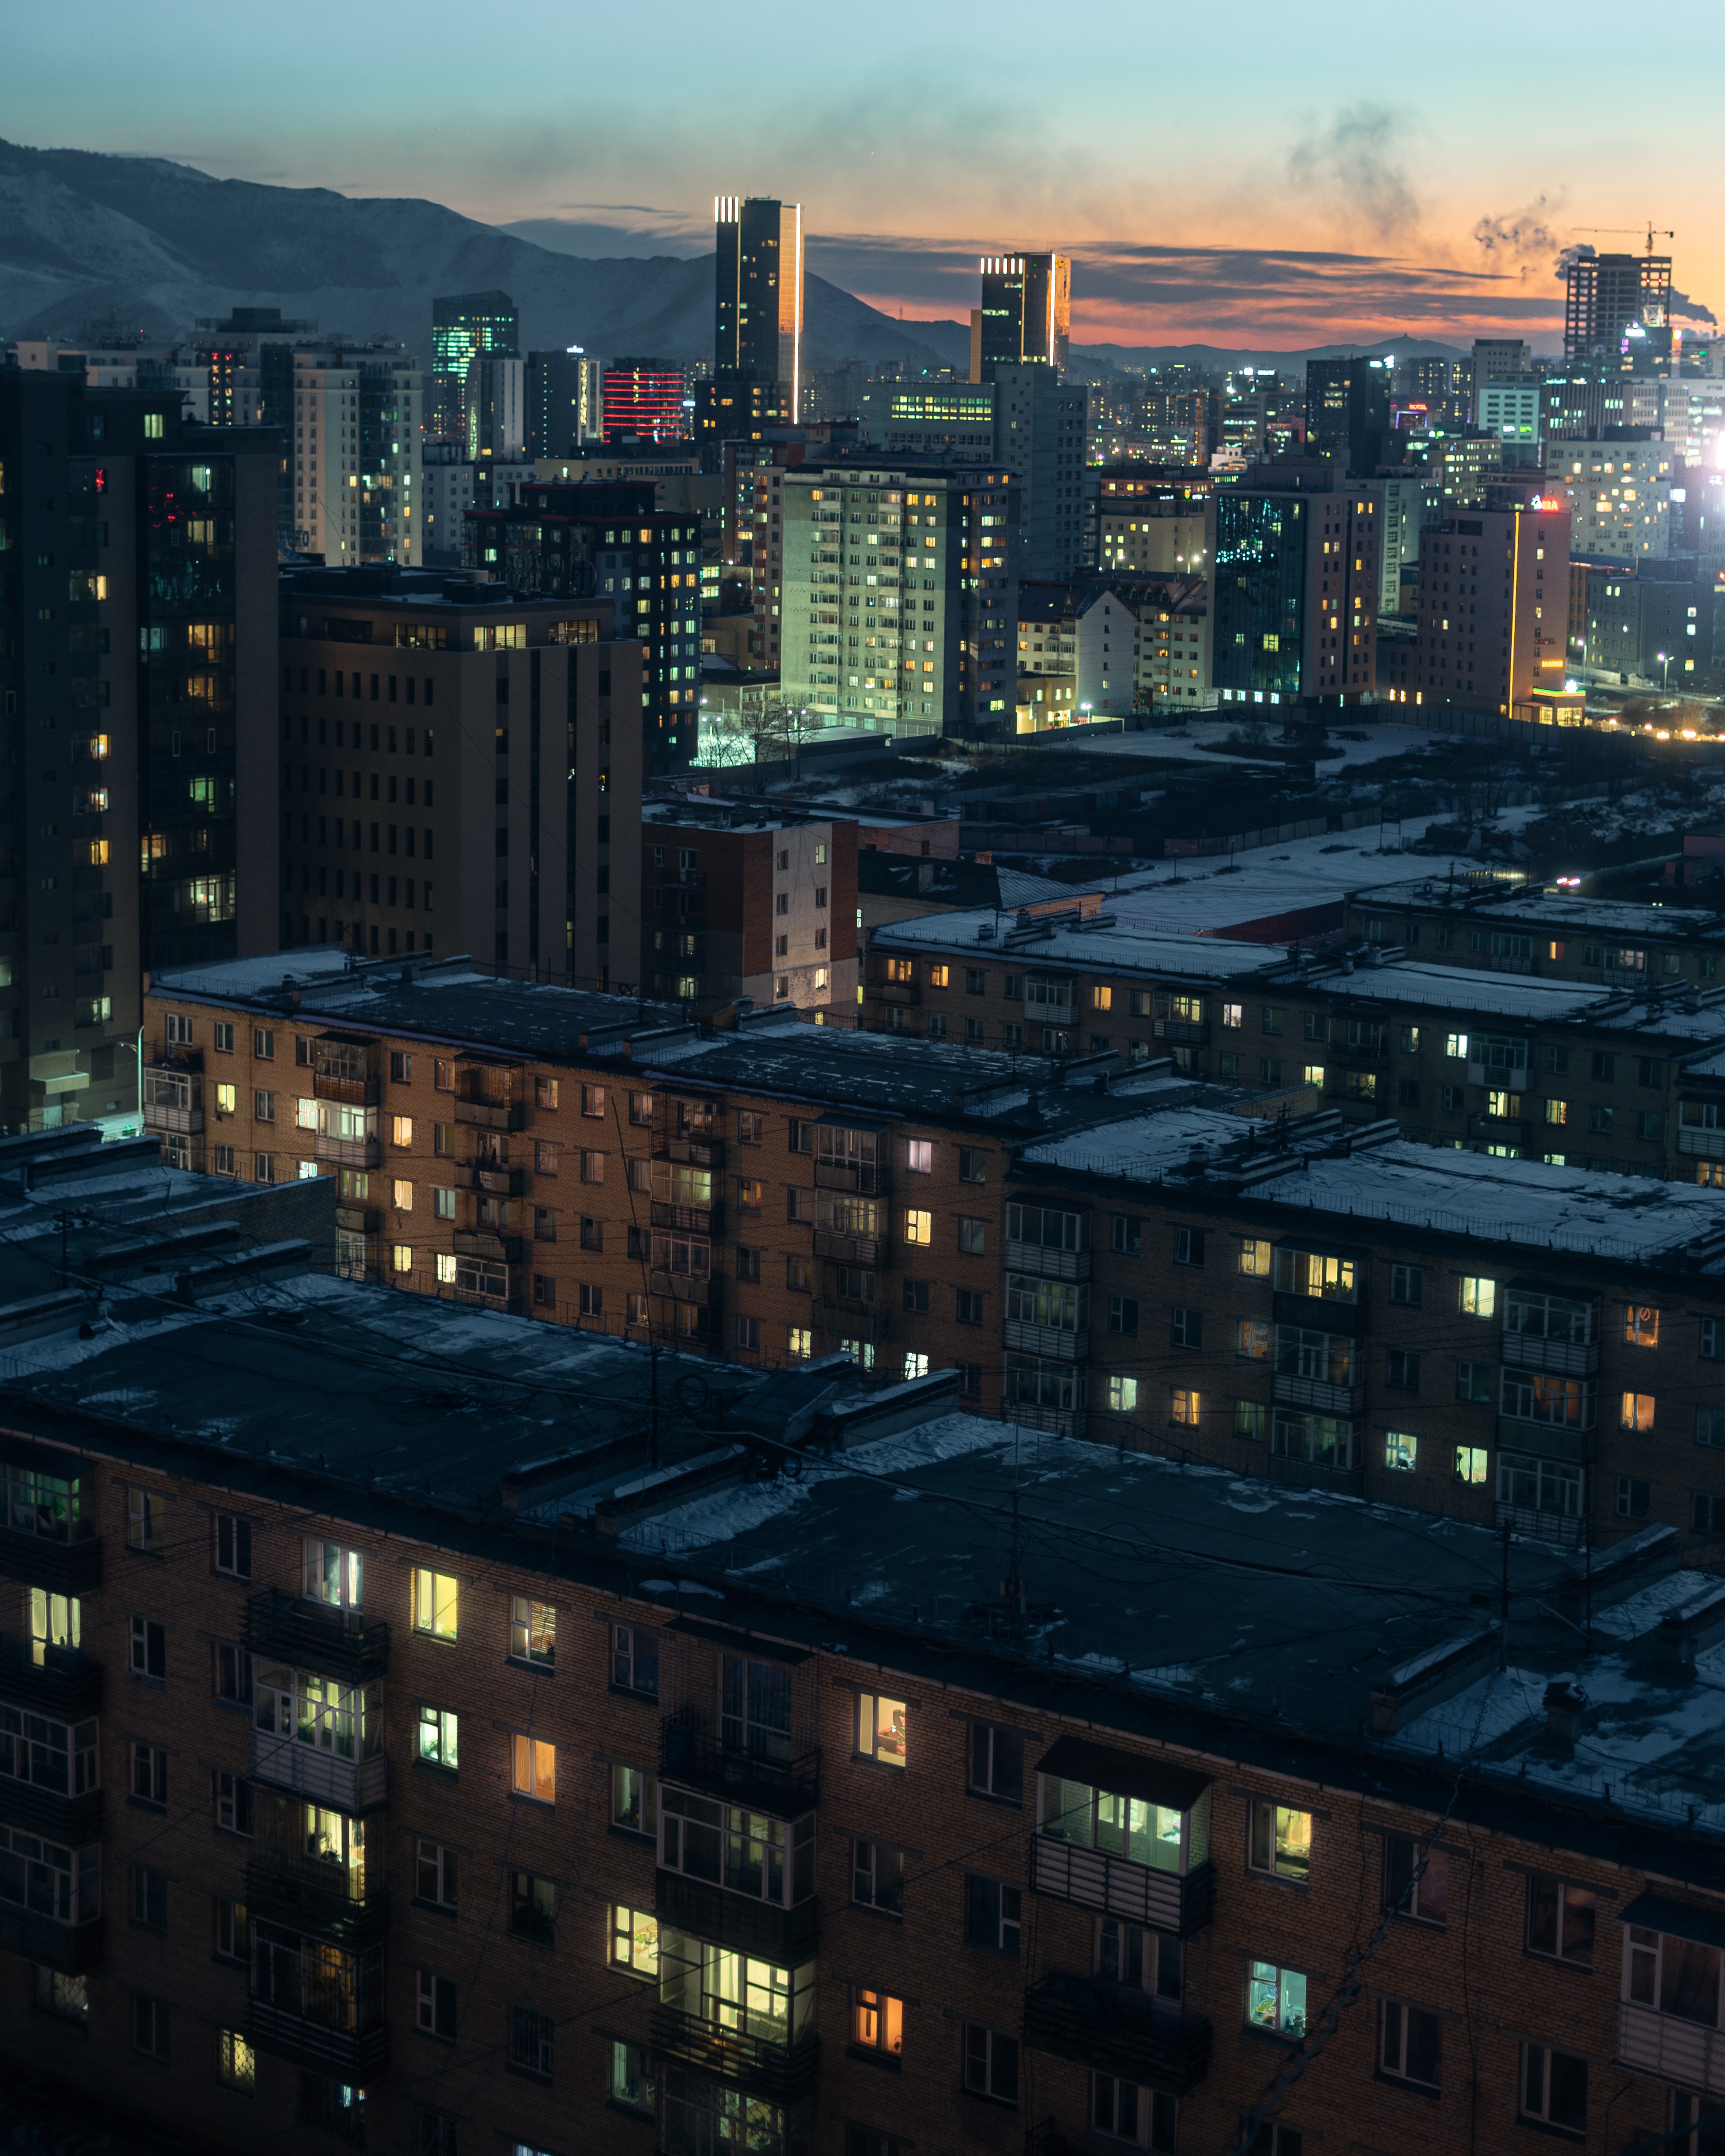 cities, twilight, city, building, view from above, dusk, urban landscape, cityscape